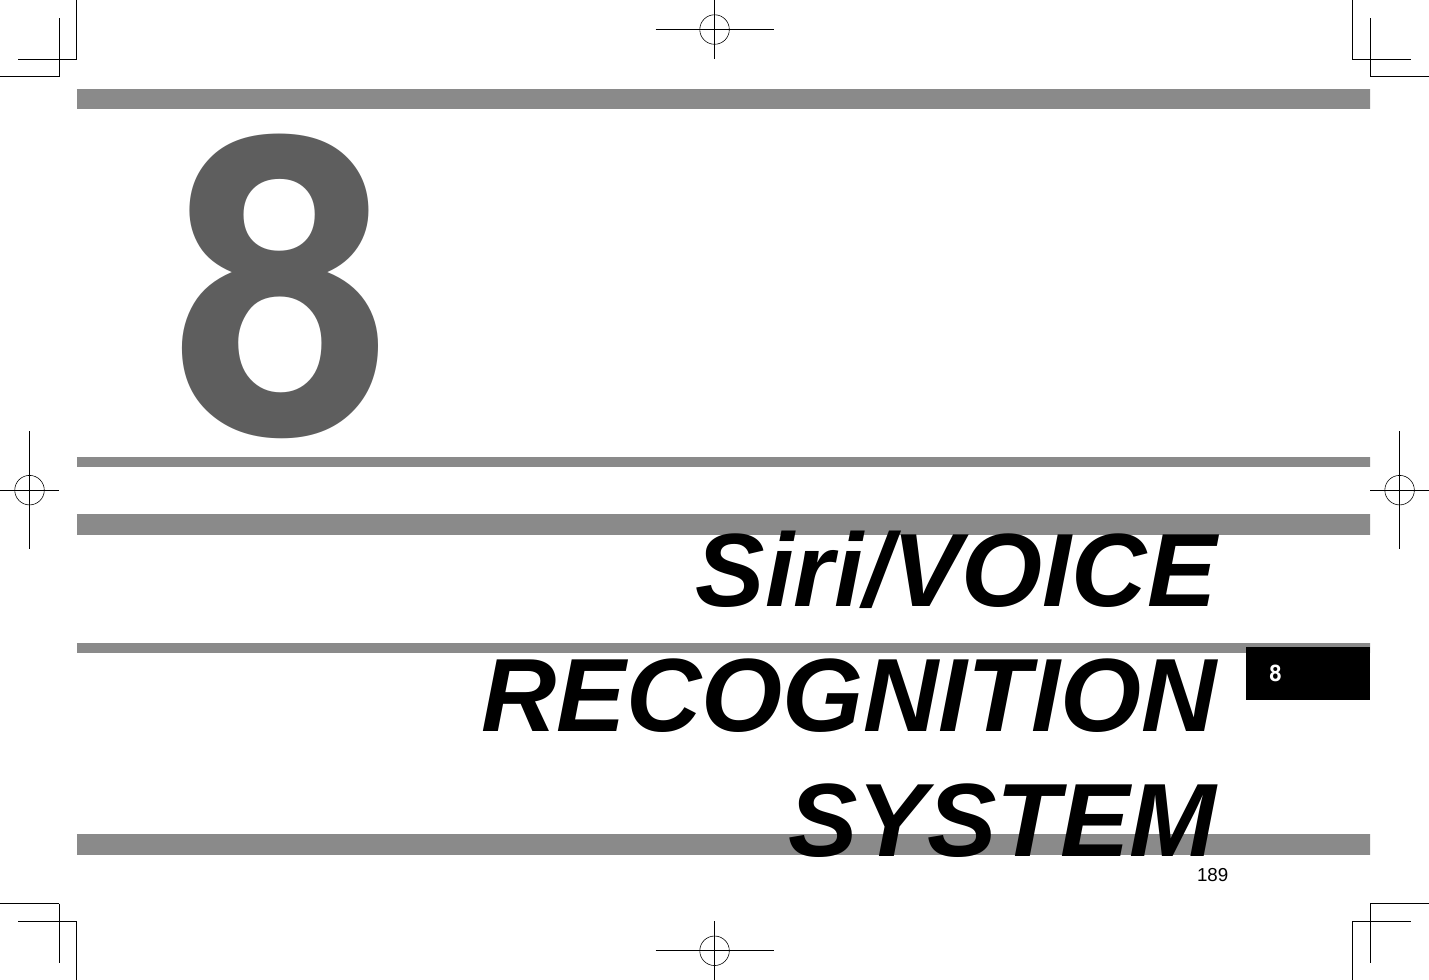 189Siri/VOICE RECOGNITION SYSTEM88